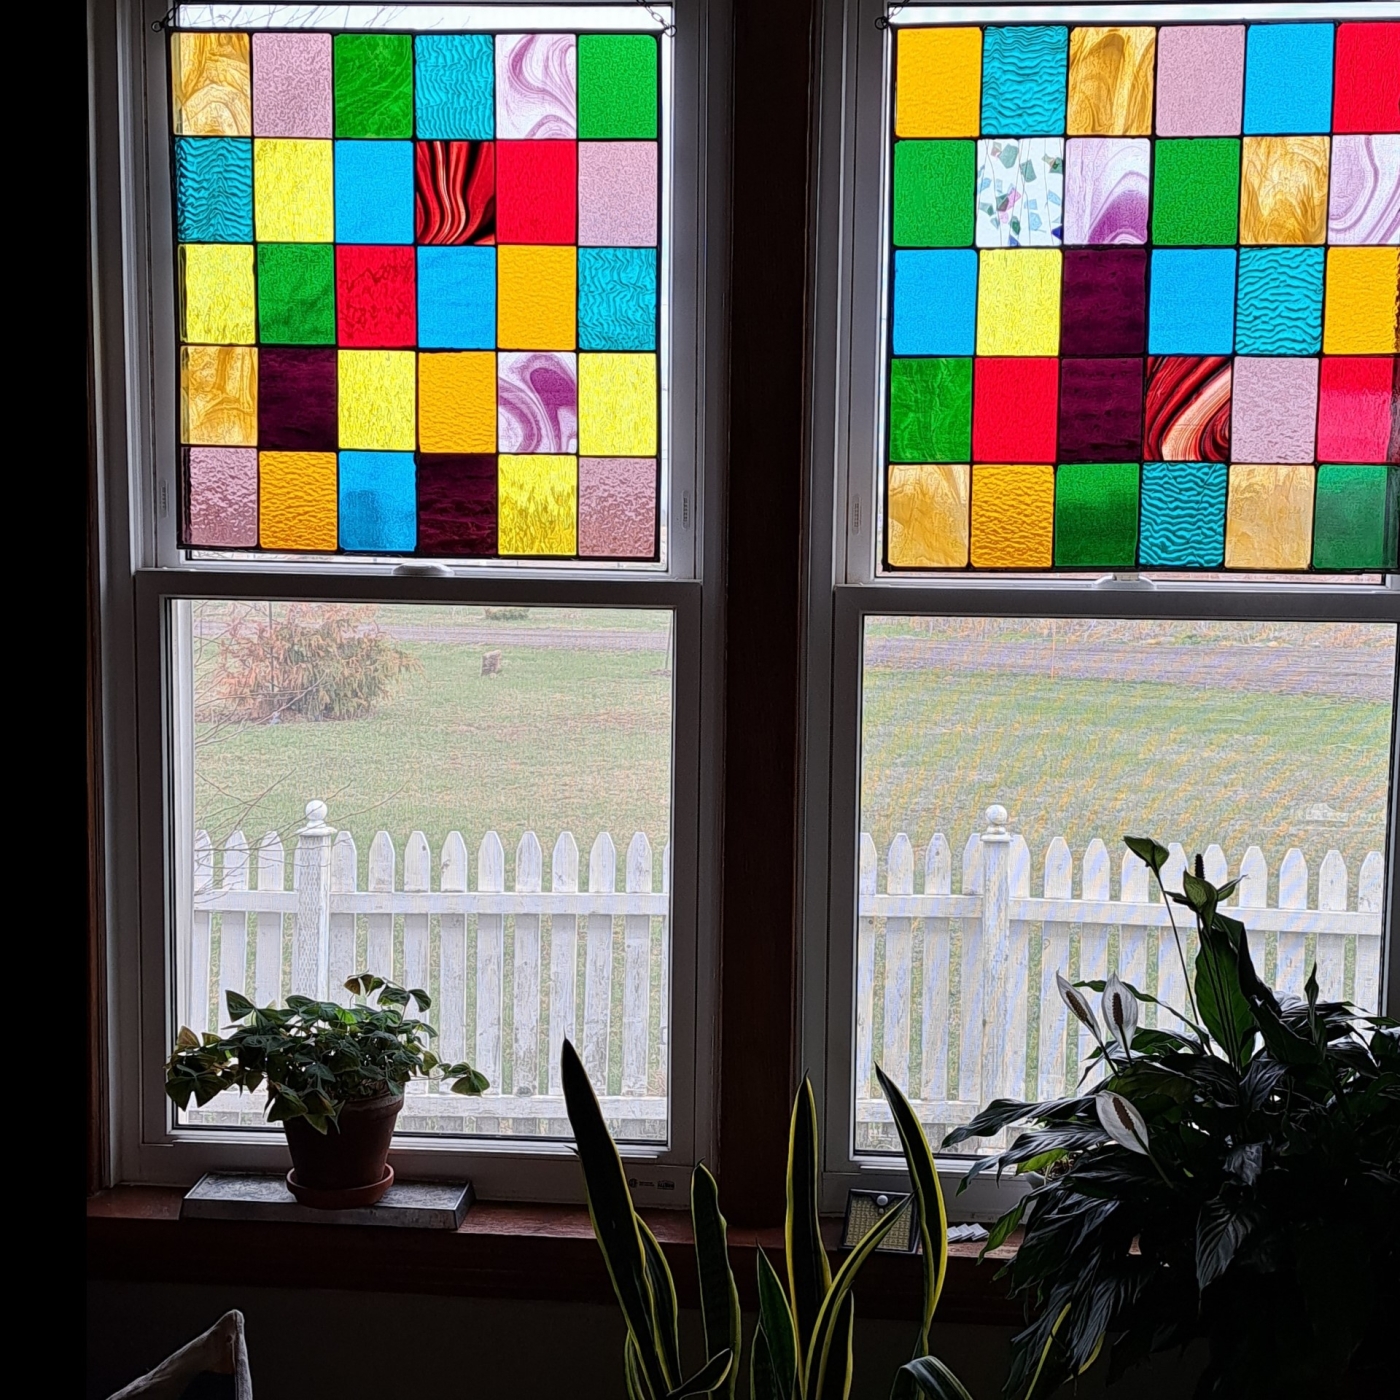 Photo of double windows looking outside. windows have top stain glass panels and plant in front of them